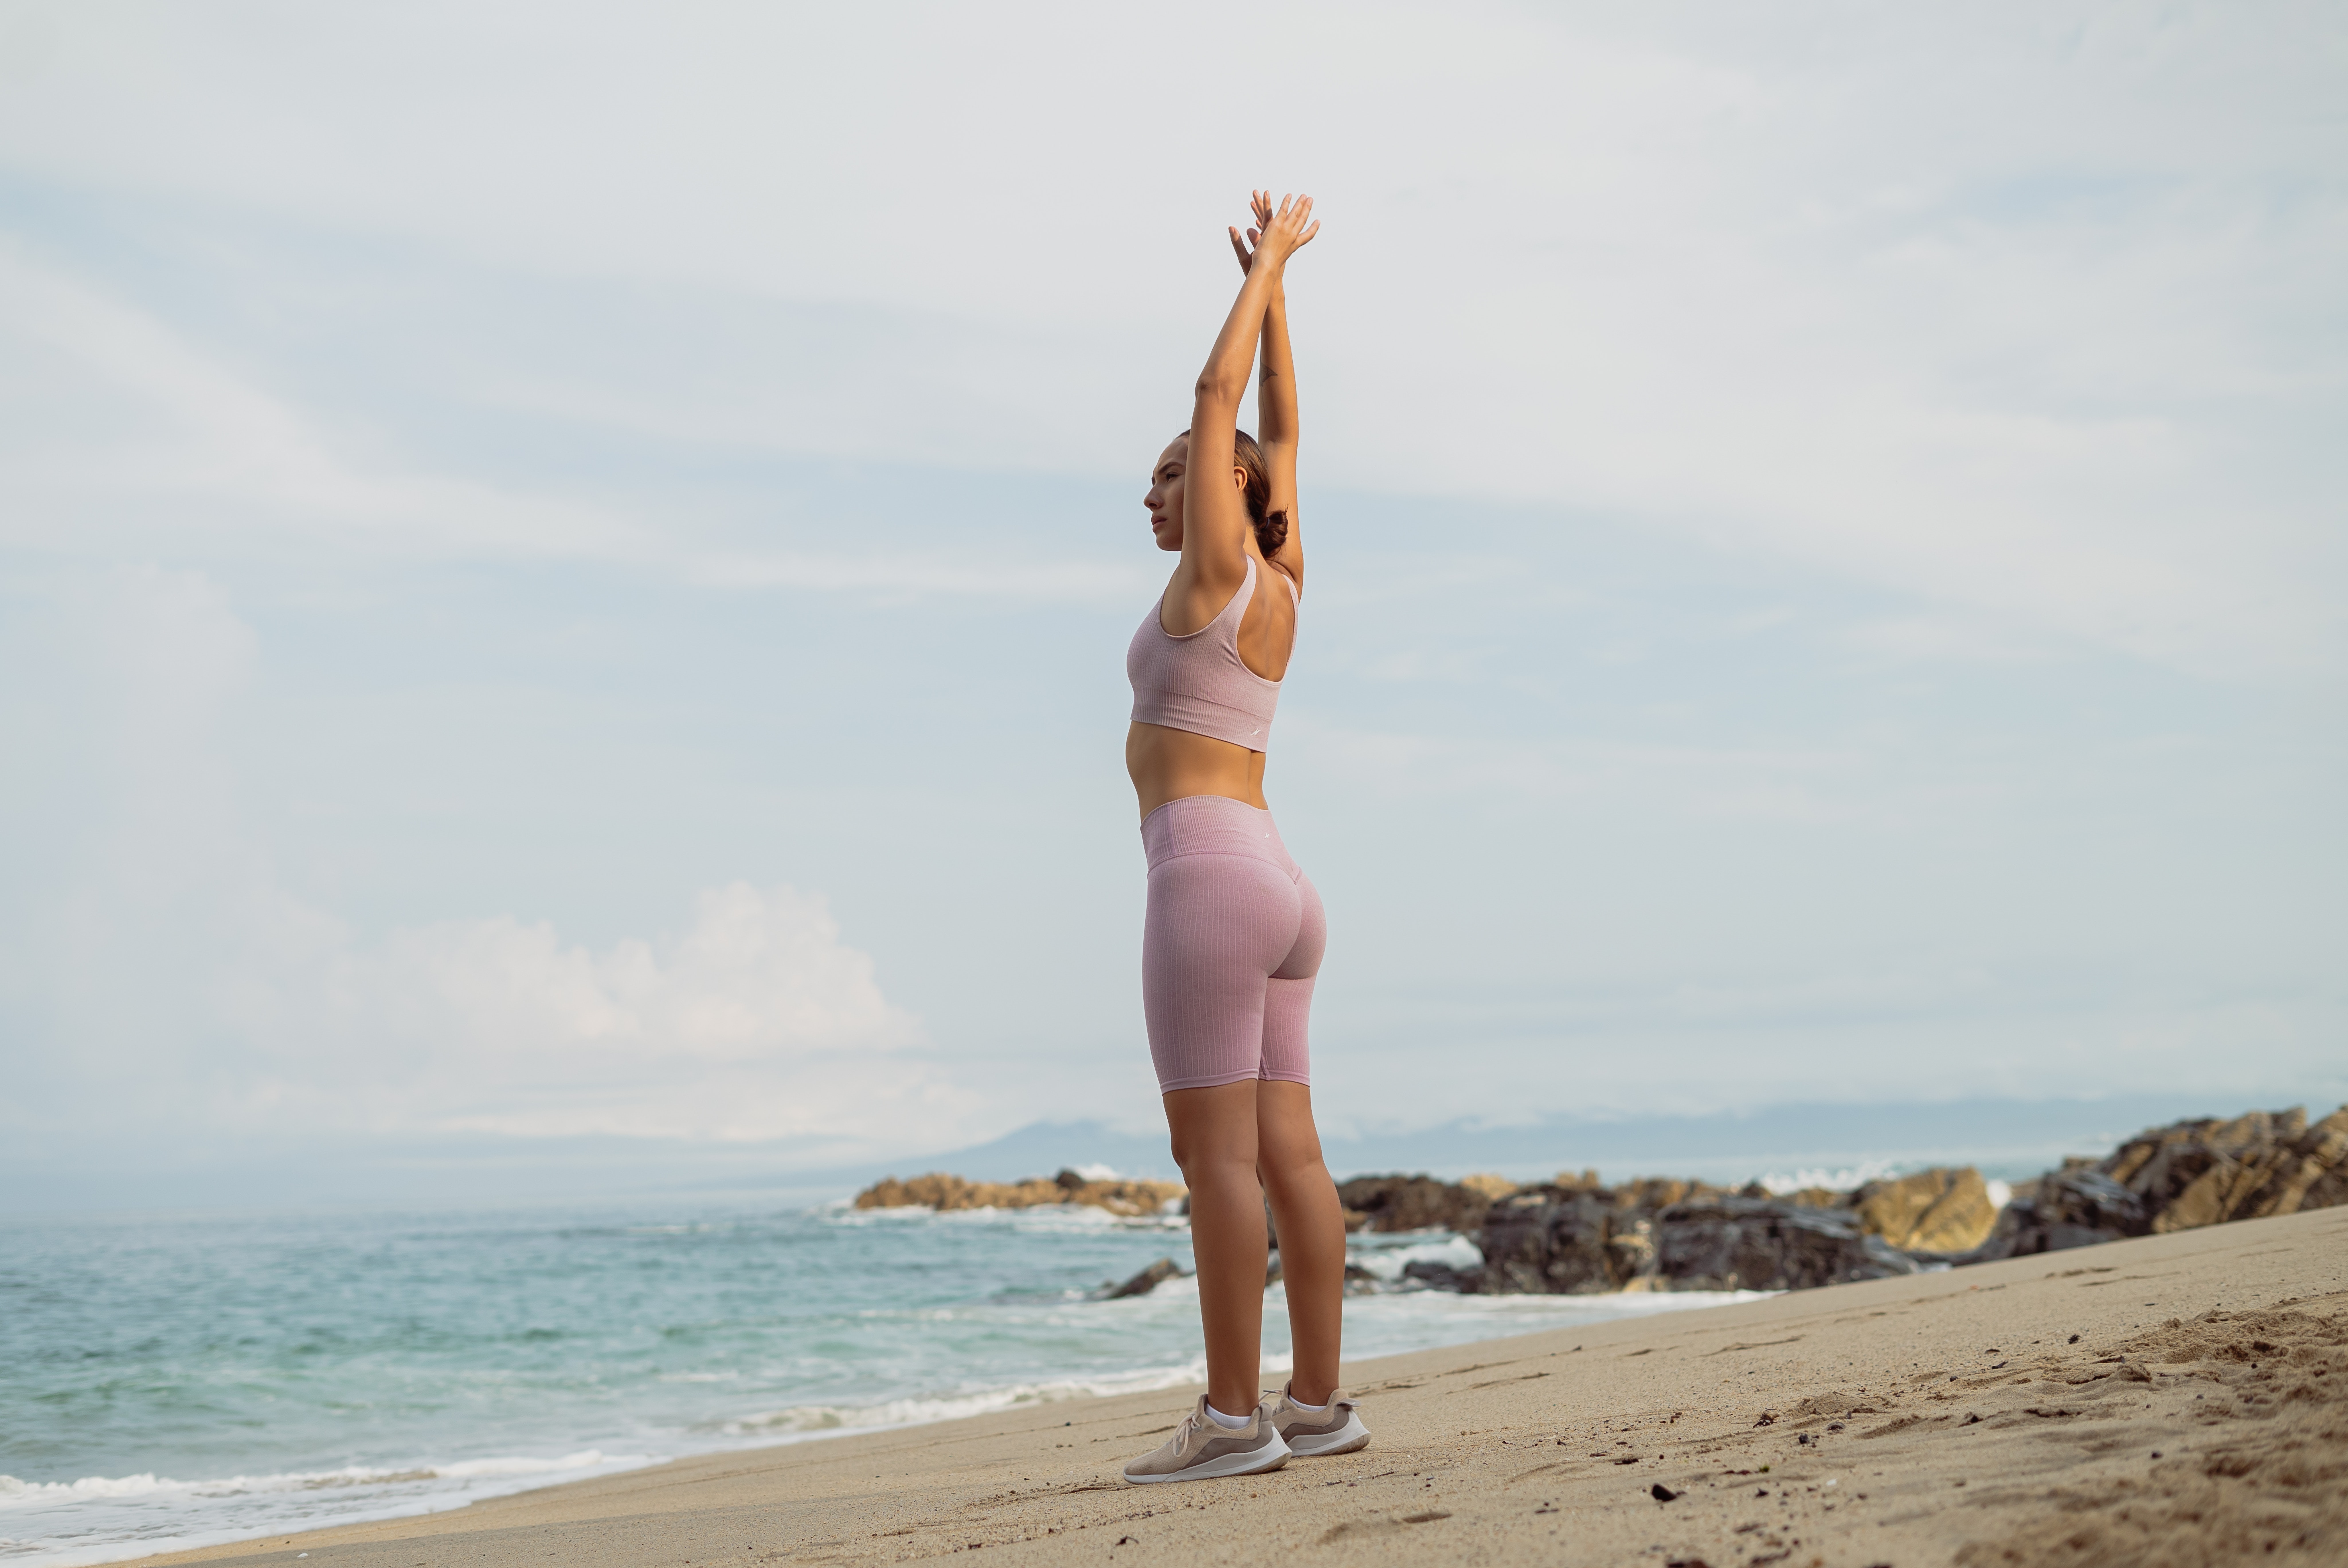 A woman who is stretching wearing sports bra, shorts, and shoes at the seashore